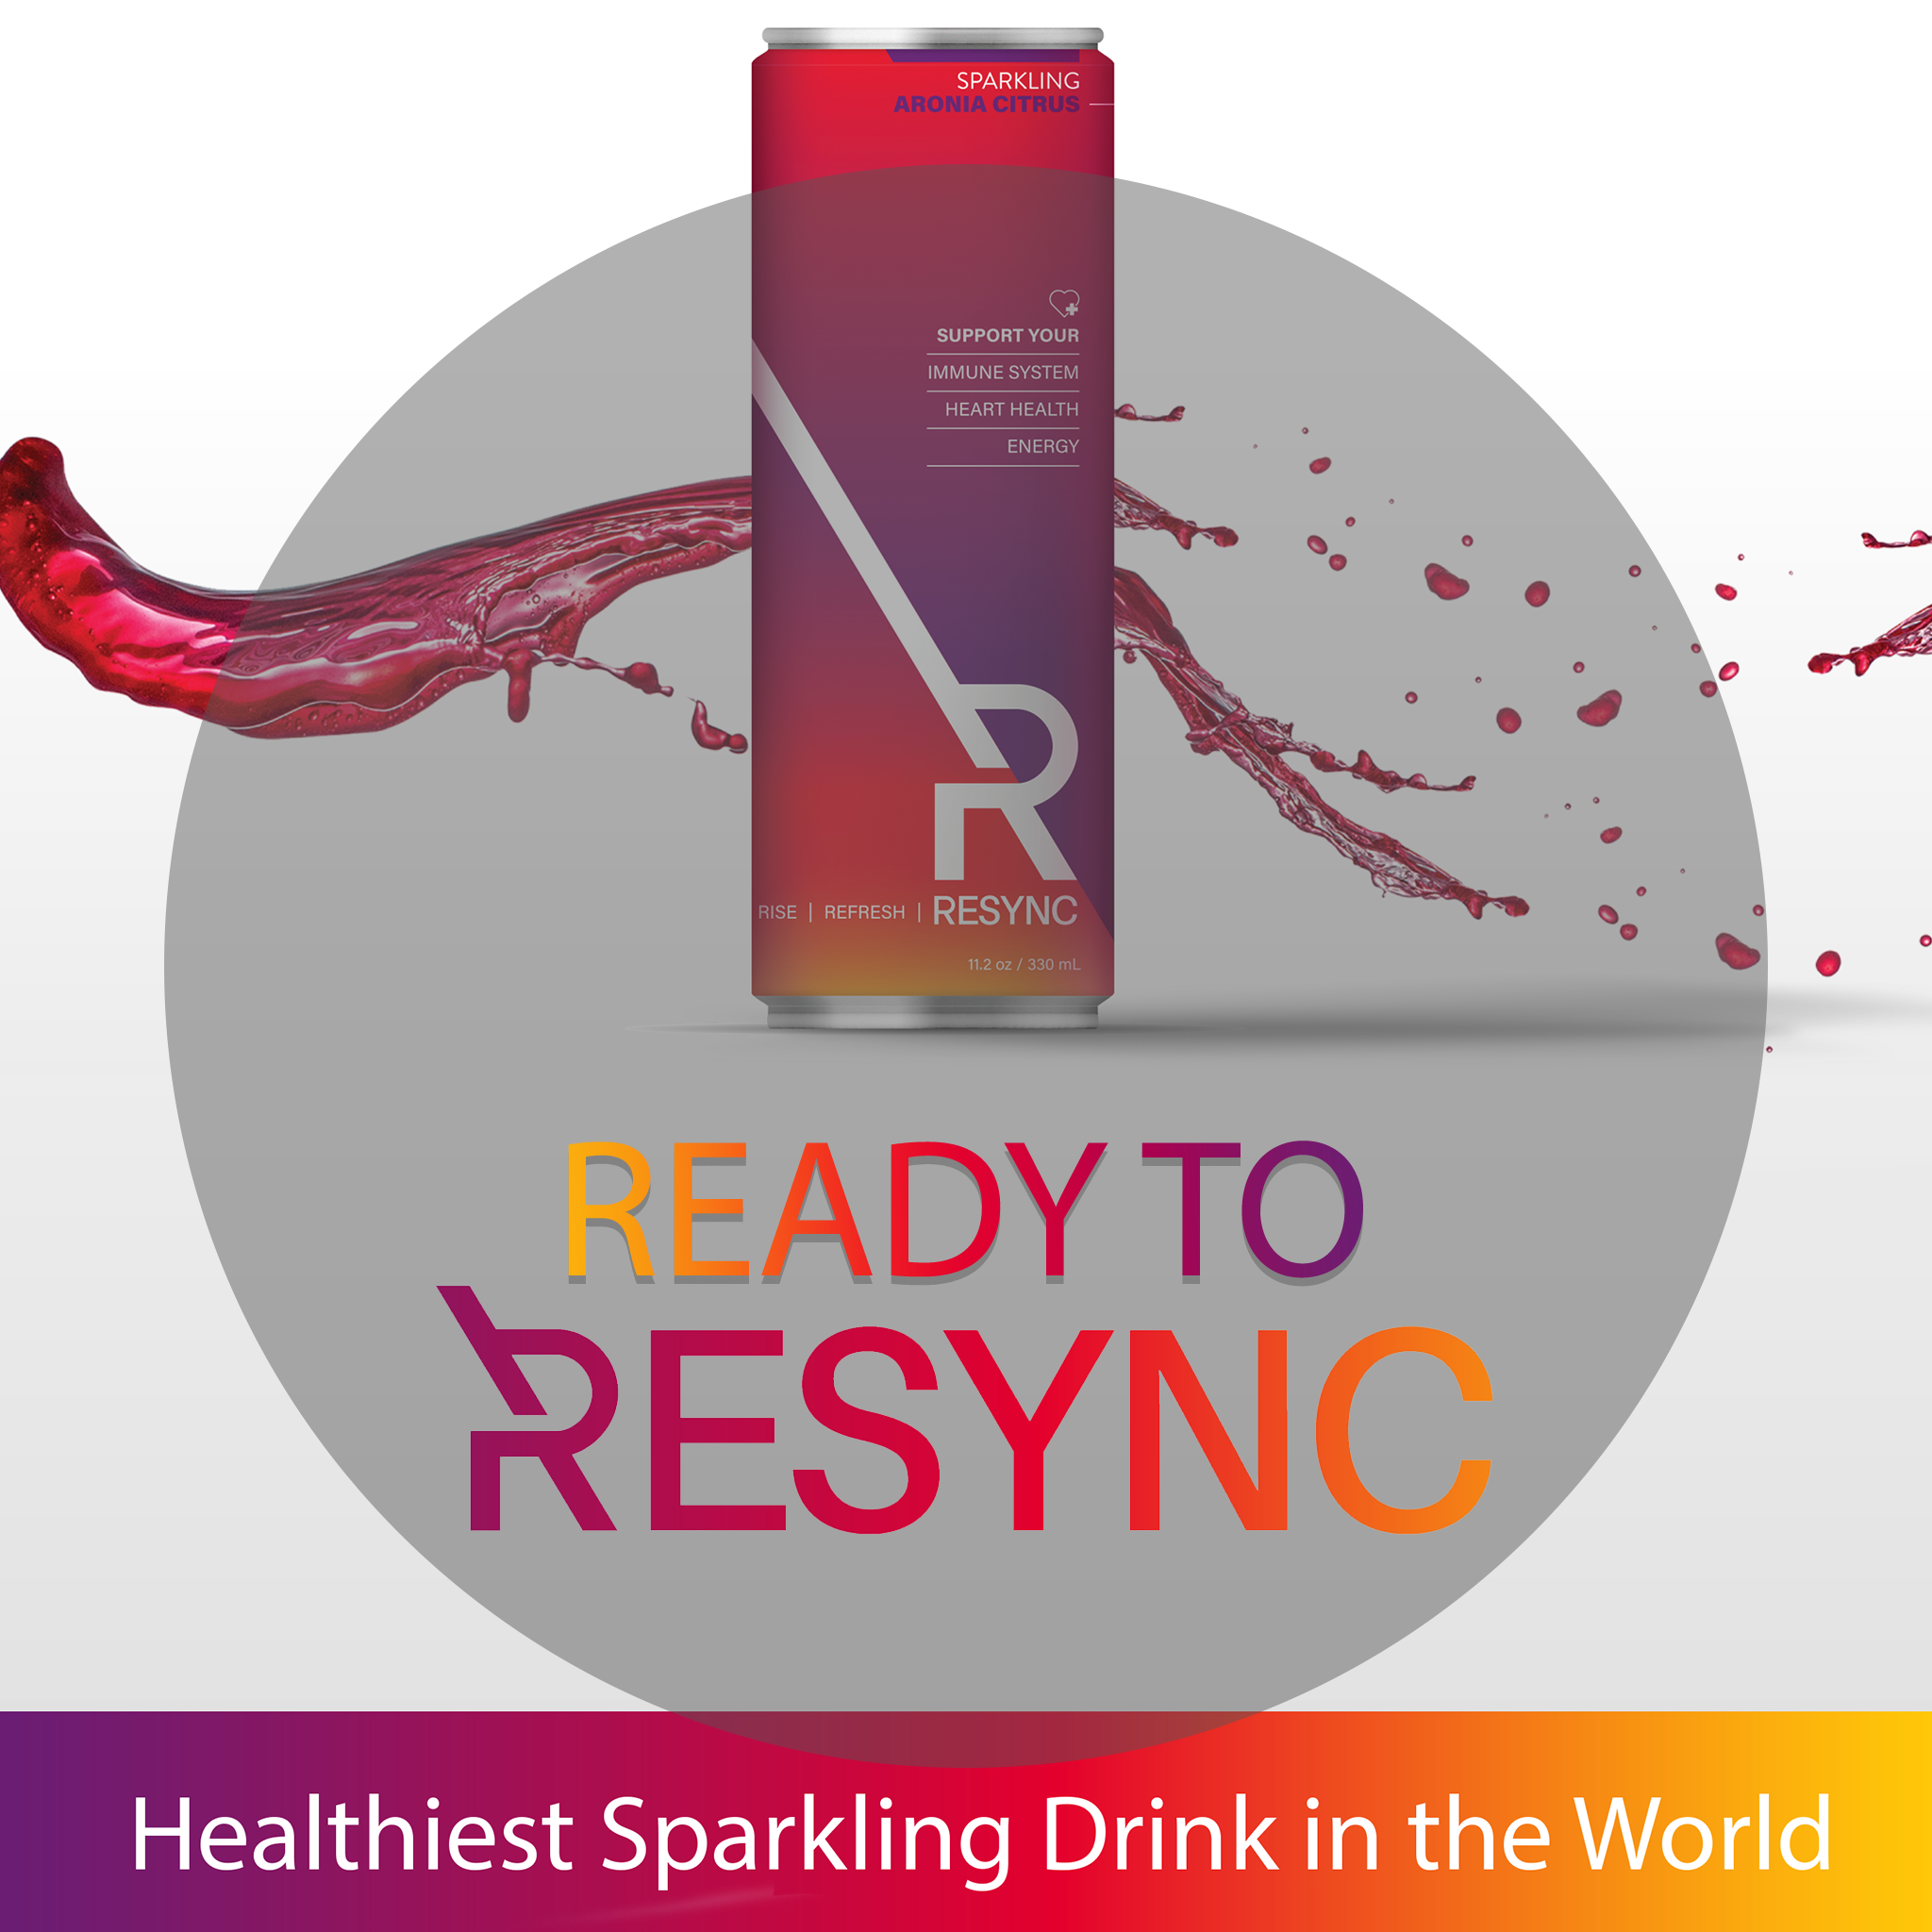 Resync RTD: the healthiest sparkling drink in the world, good for your heart, immunes system, and energy